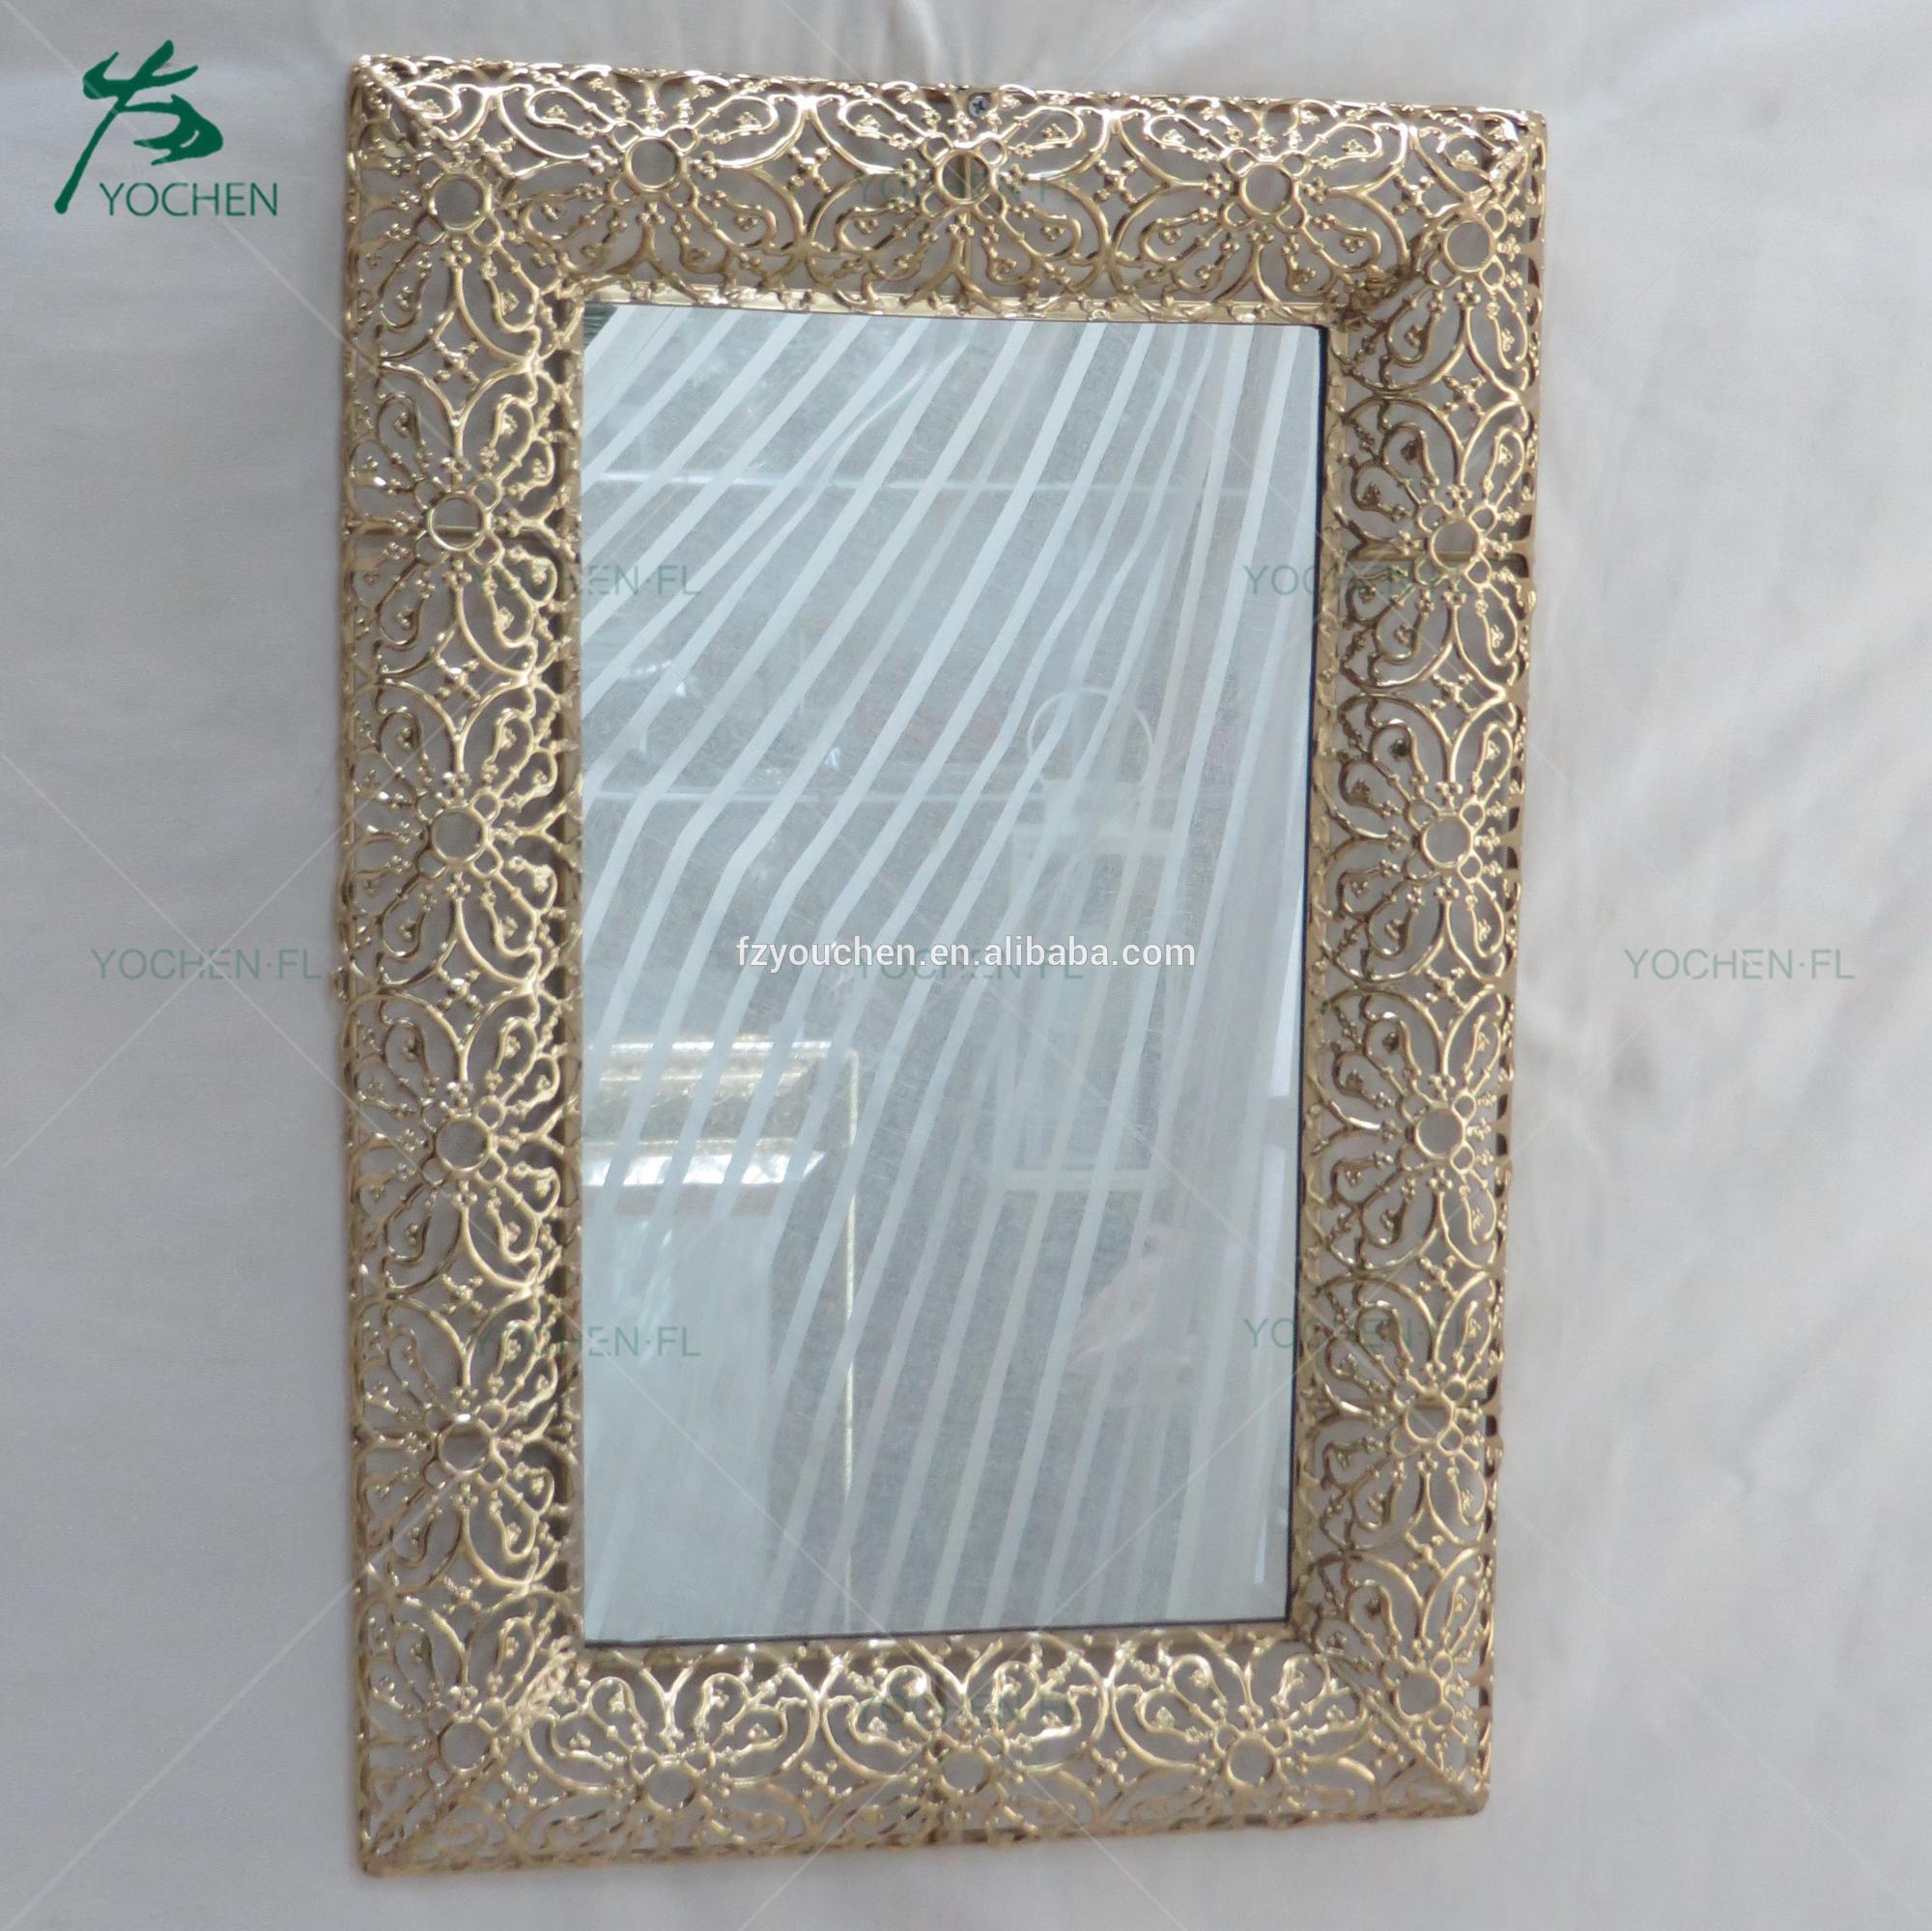 Metal frame mirror home decoration wall hanging mirror